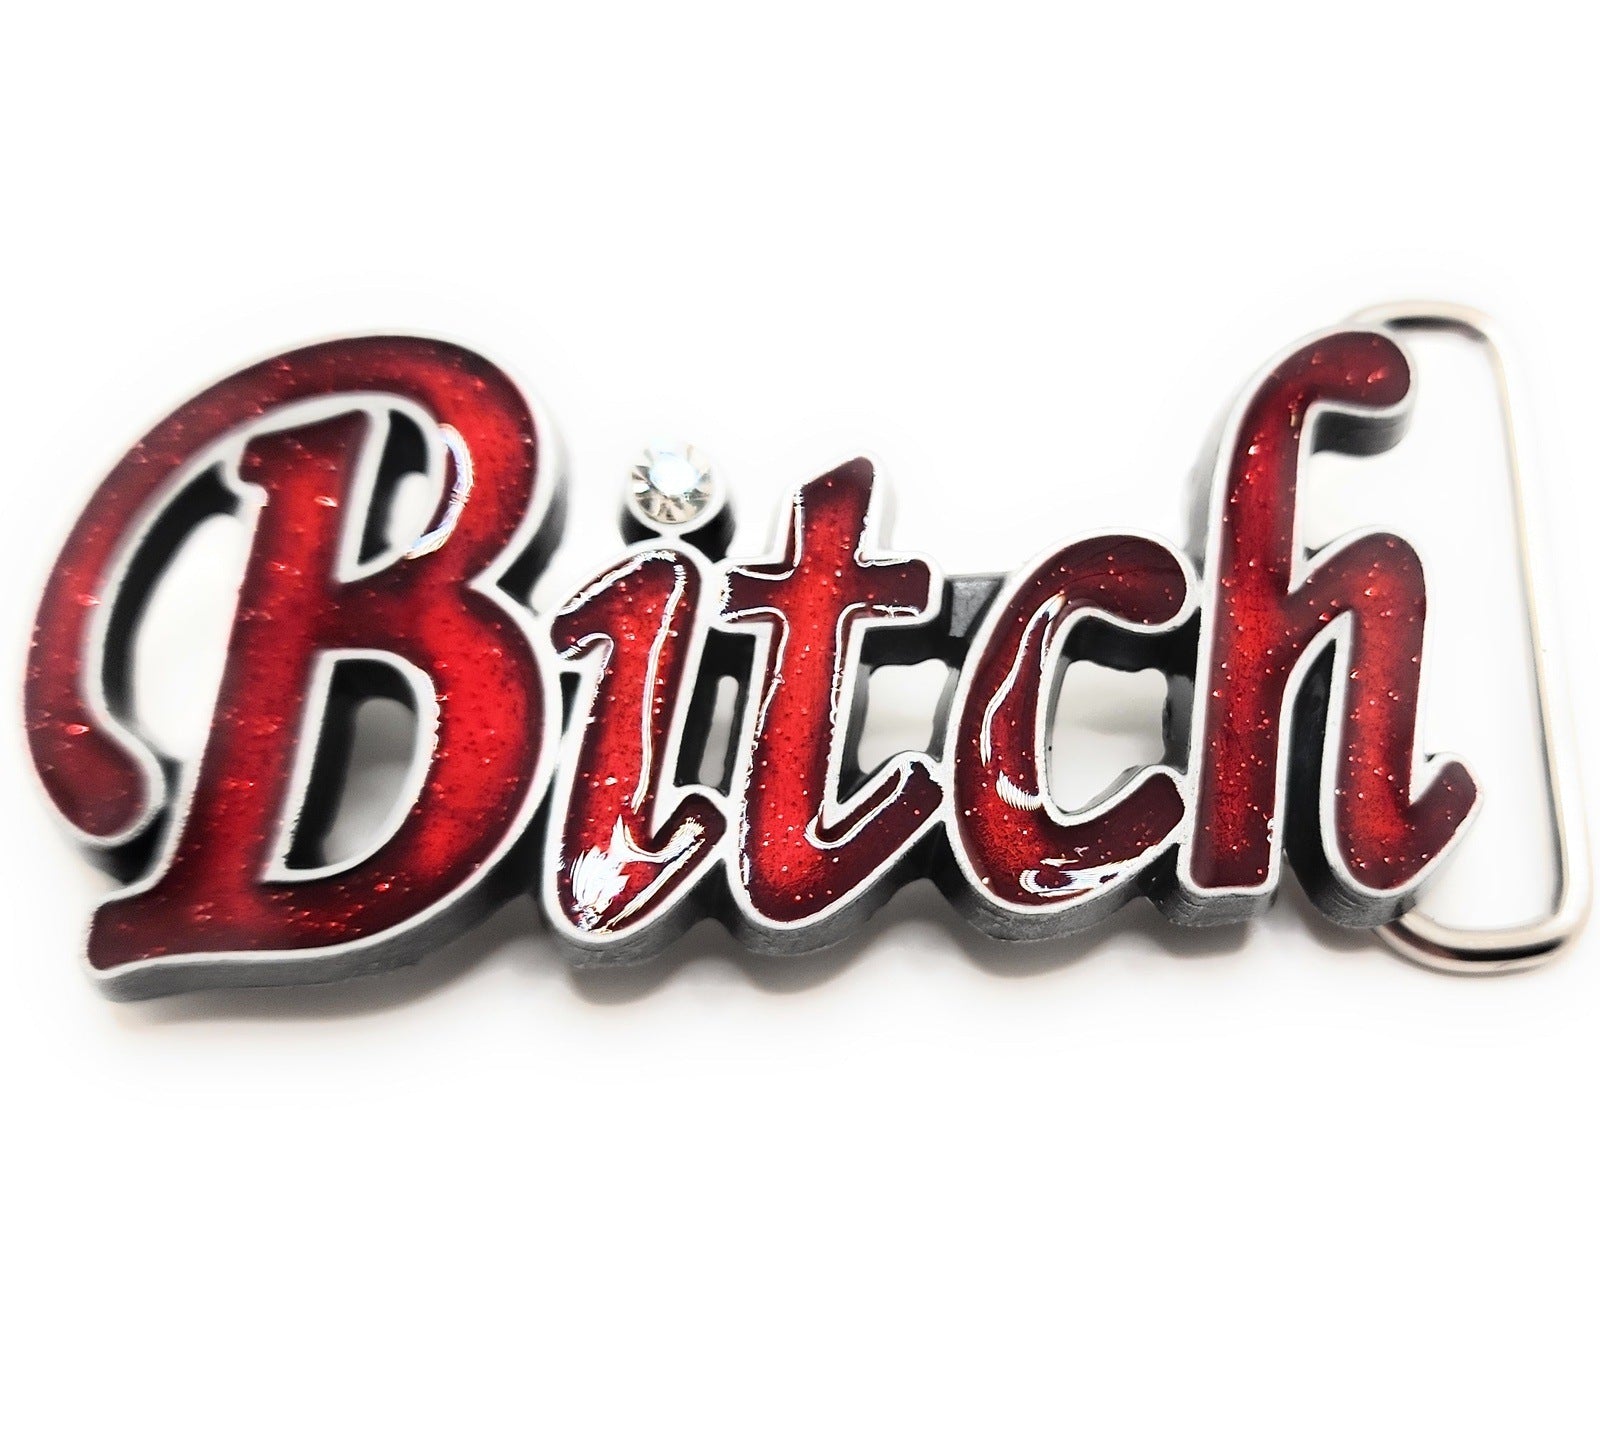 Red Sparkly "Bitch" Belt Buckle with Rhinestone Funny shop.AxeDr.com Belt Buckle, Funny, Funny Belt Buckle